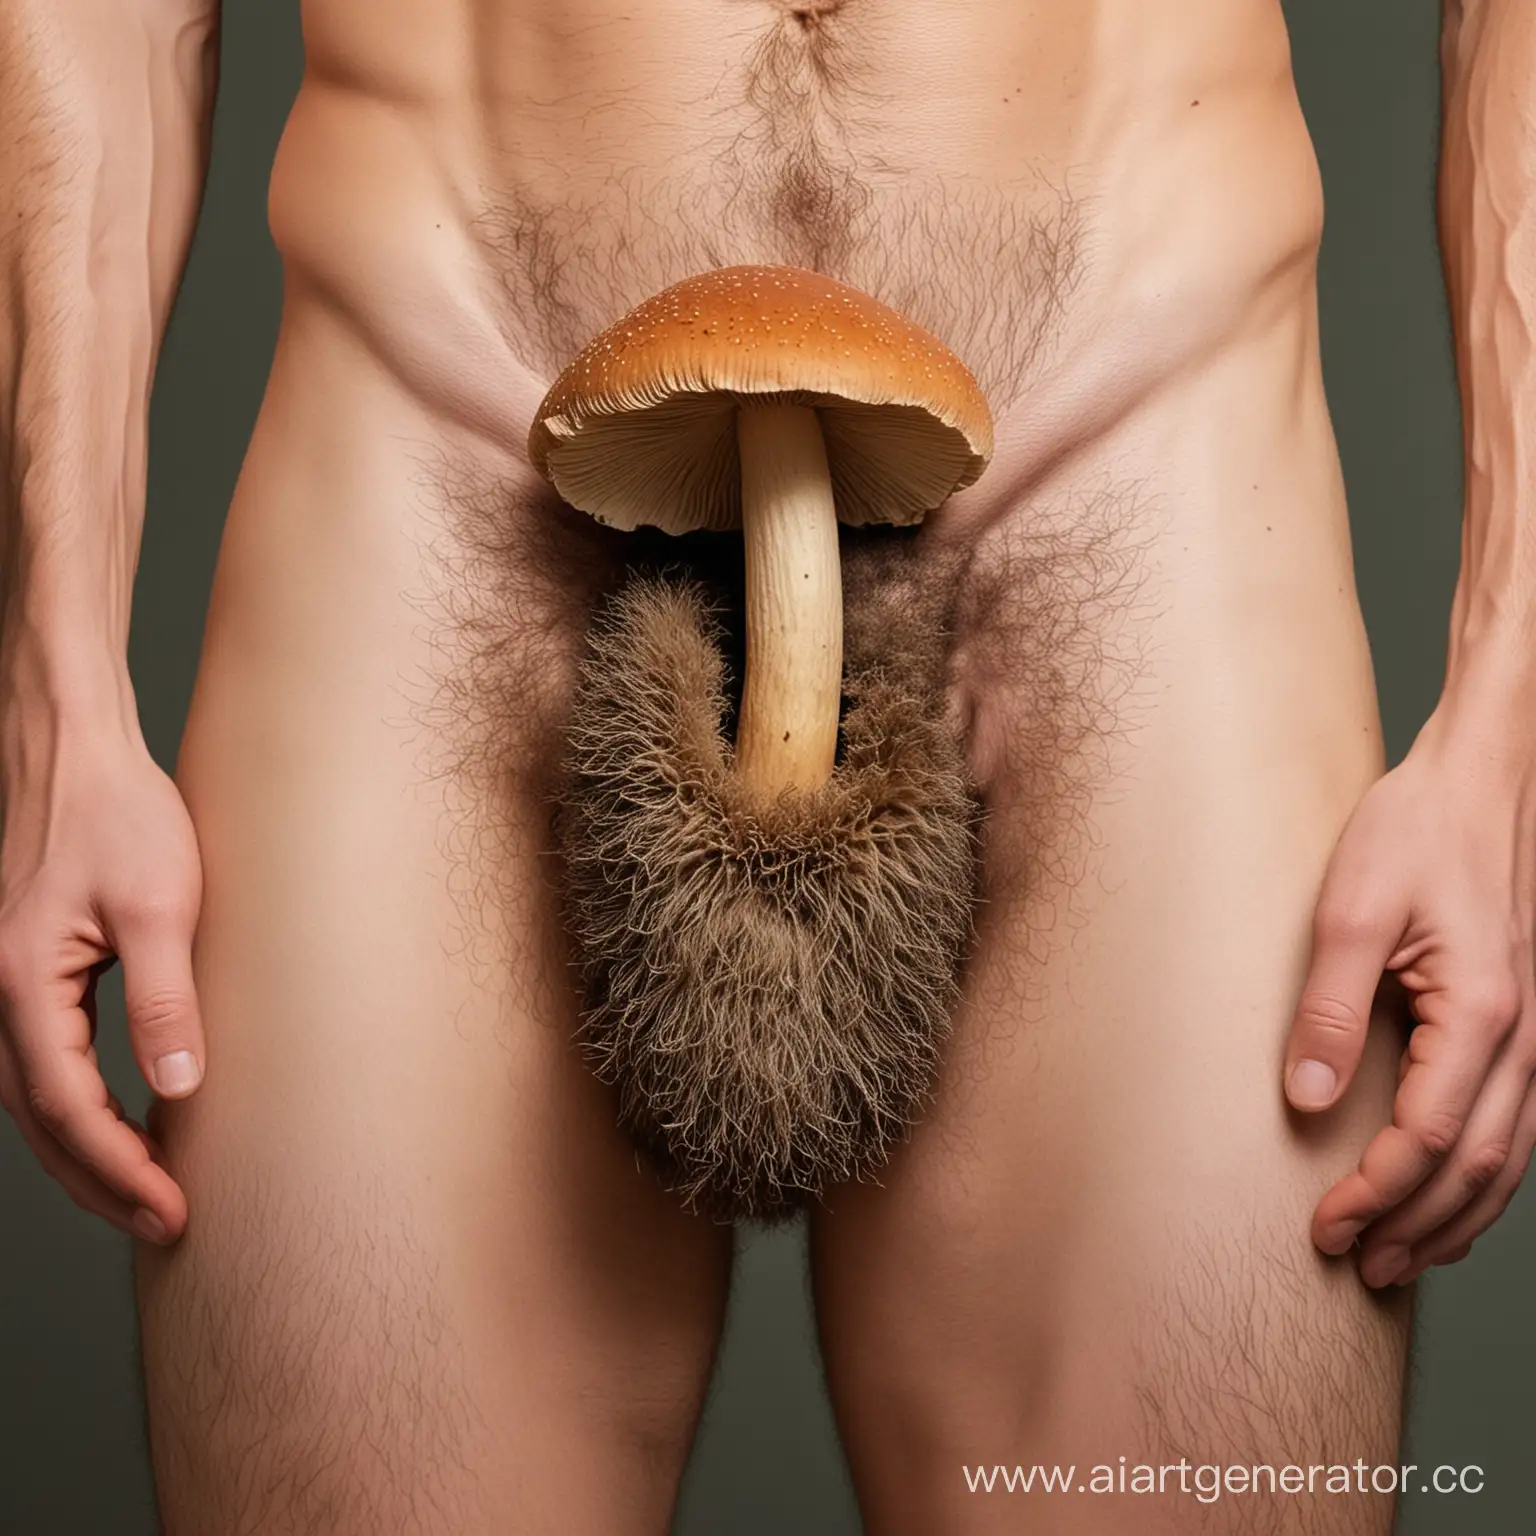 Bare-Man-with-Mushroom-Adorned-Pubis-in-Natural-Setting